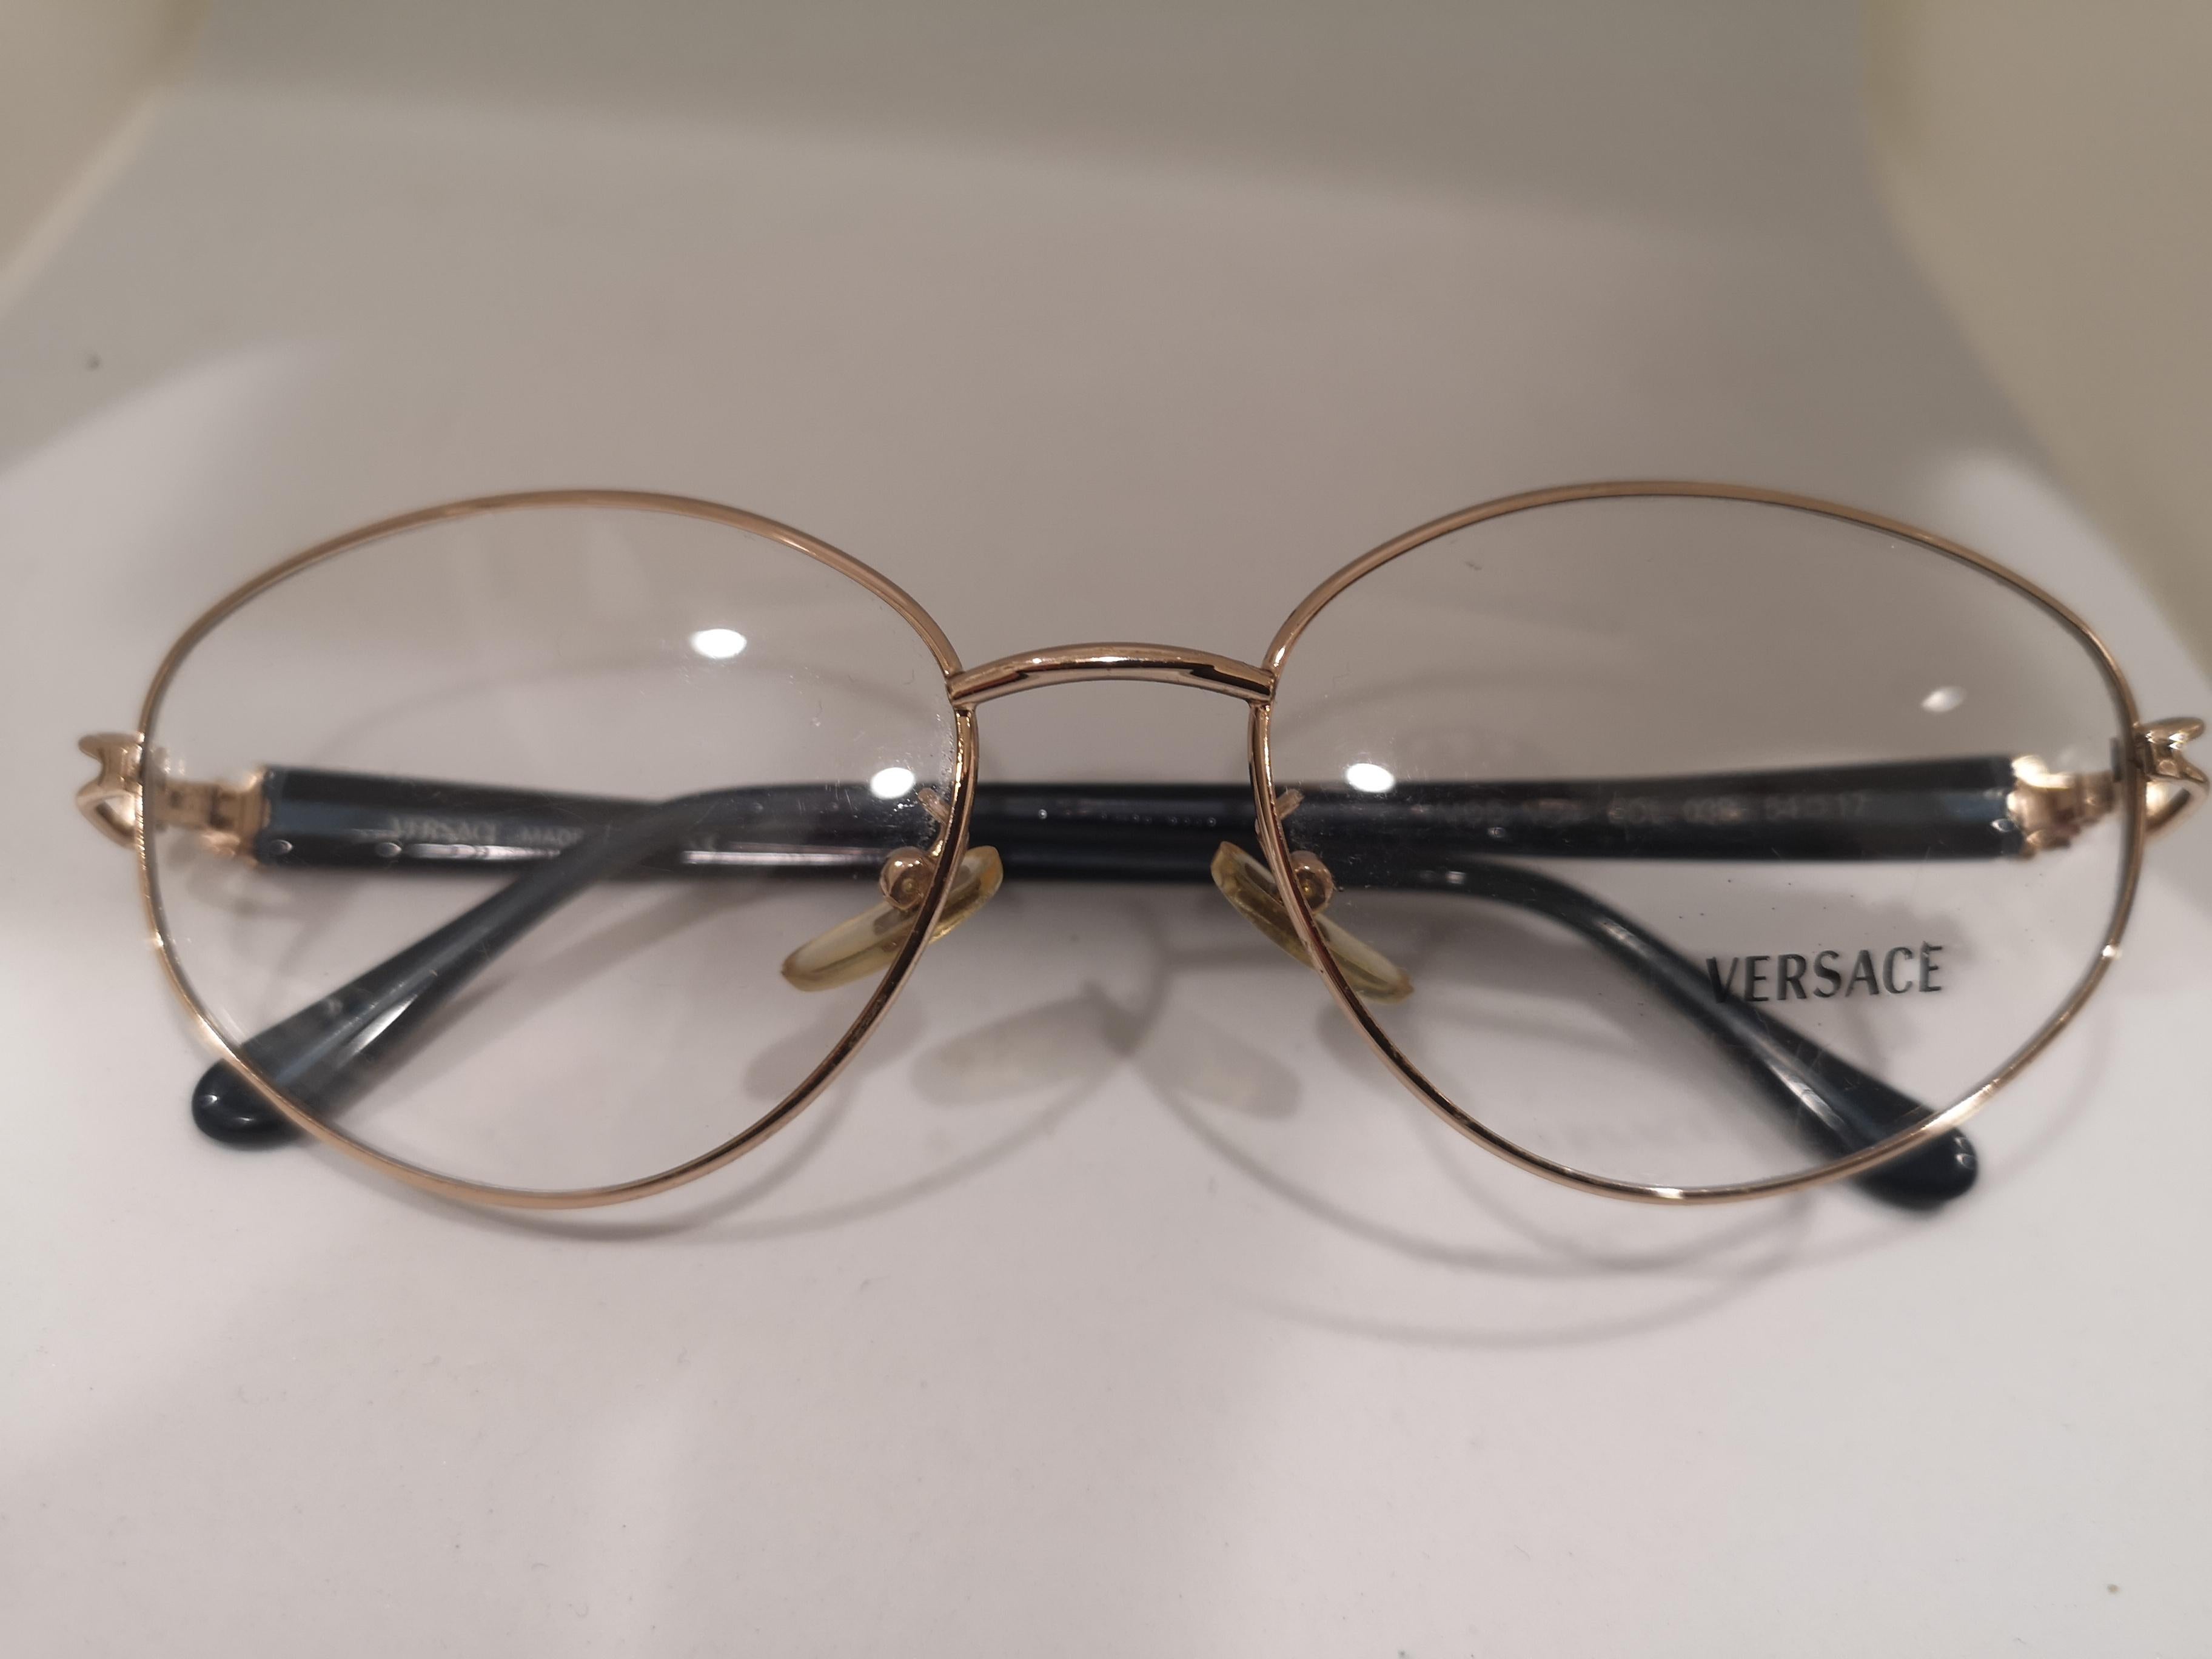 Versace frames glasses
totally made in italy